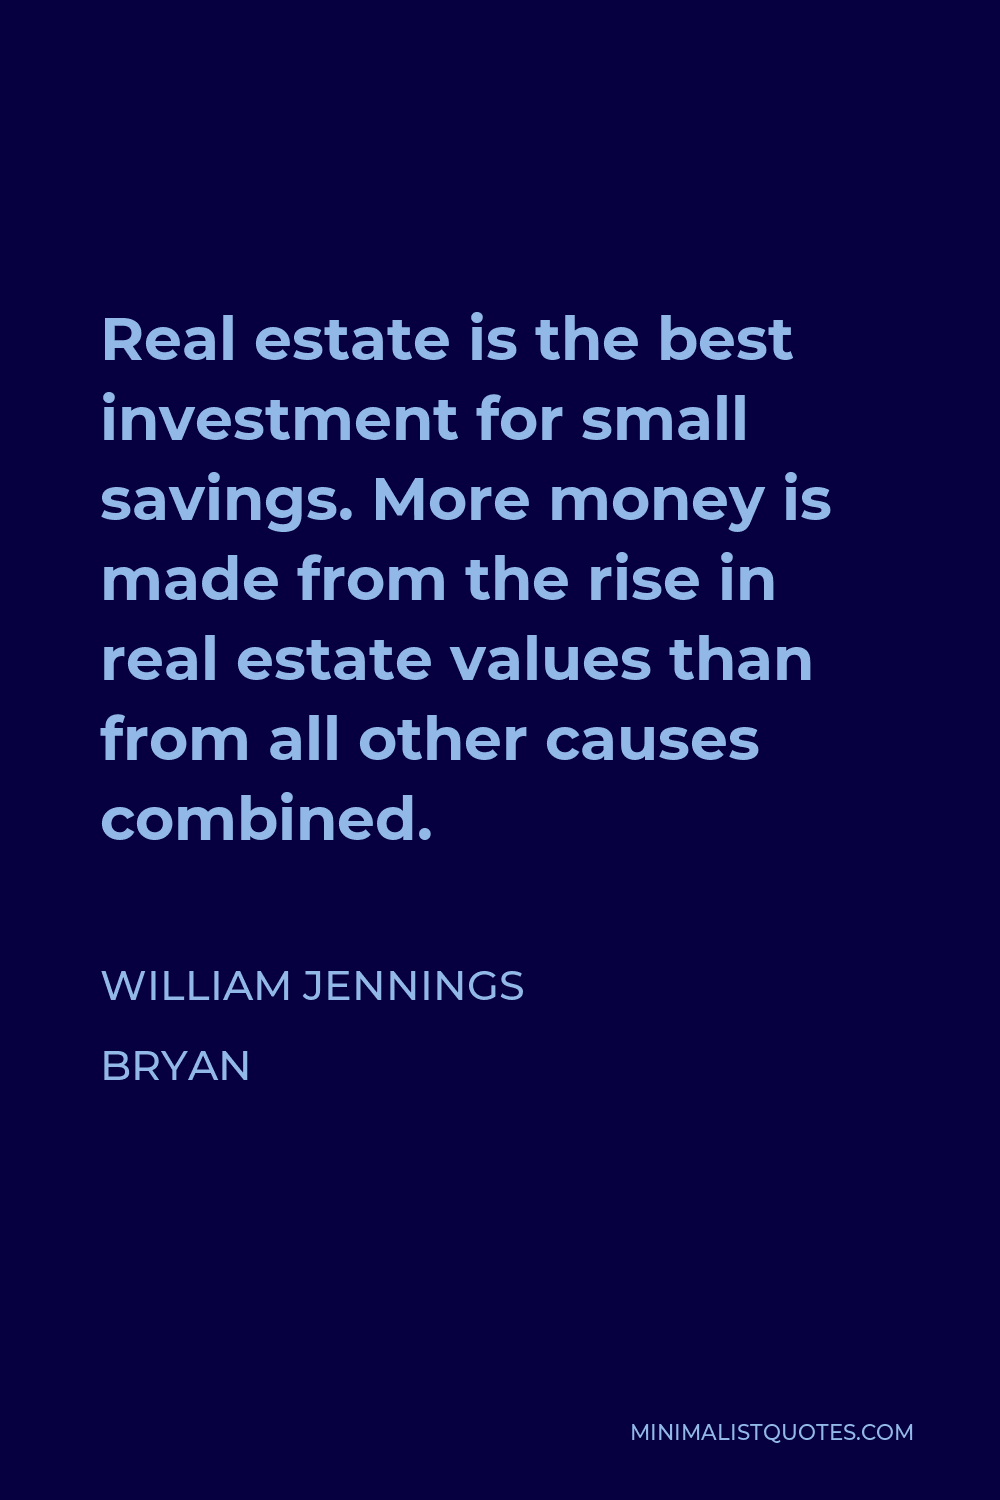 William Jennings Bryan Quote - Real estate is the best investment for small savings. More money is made from the rise in real estate values than from all other causes combined.